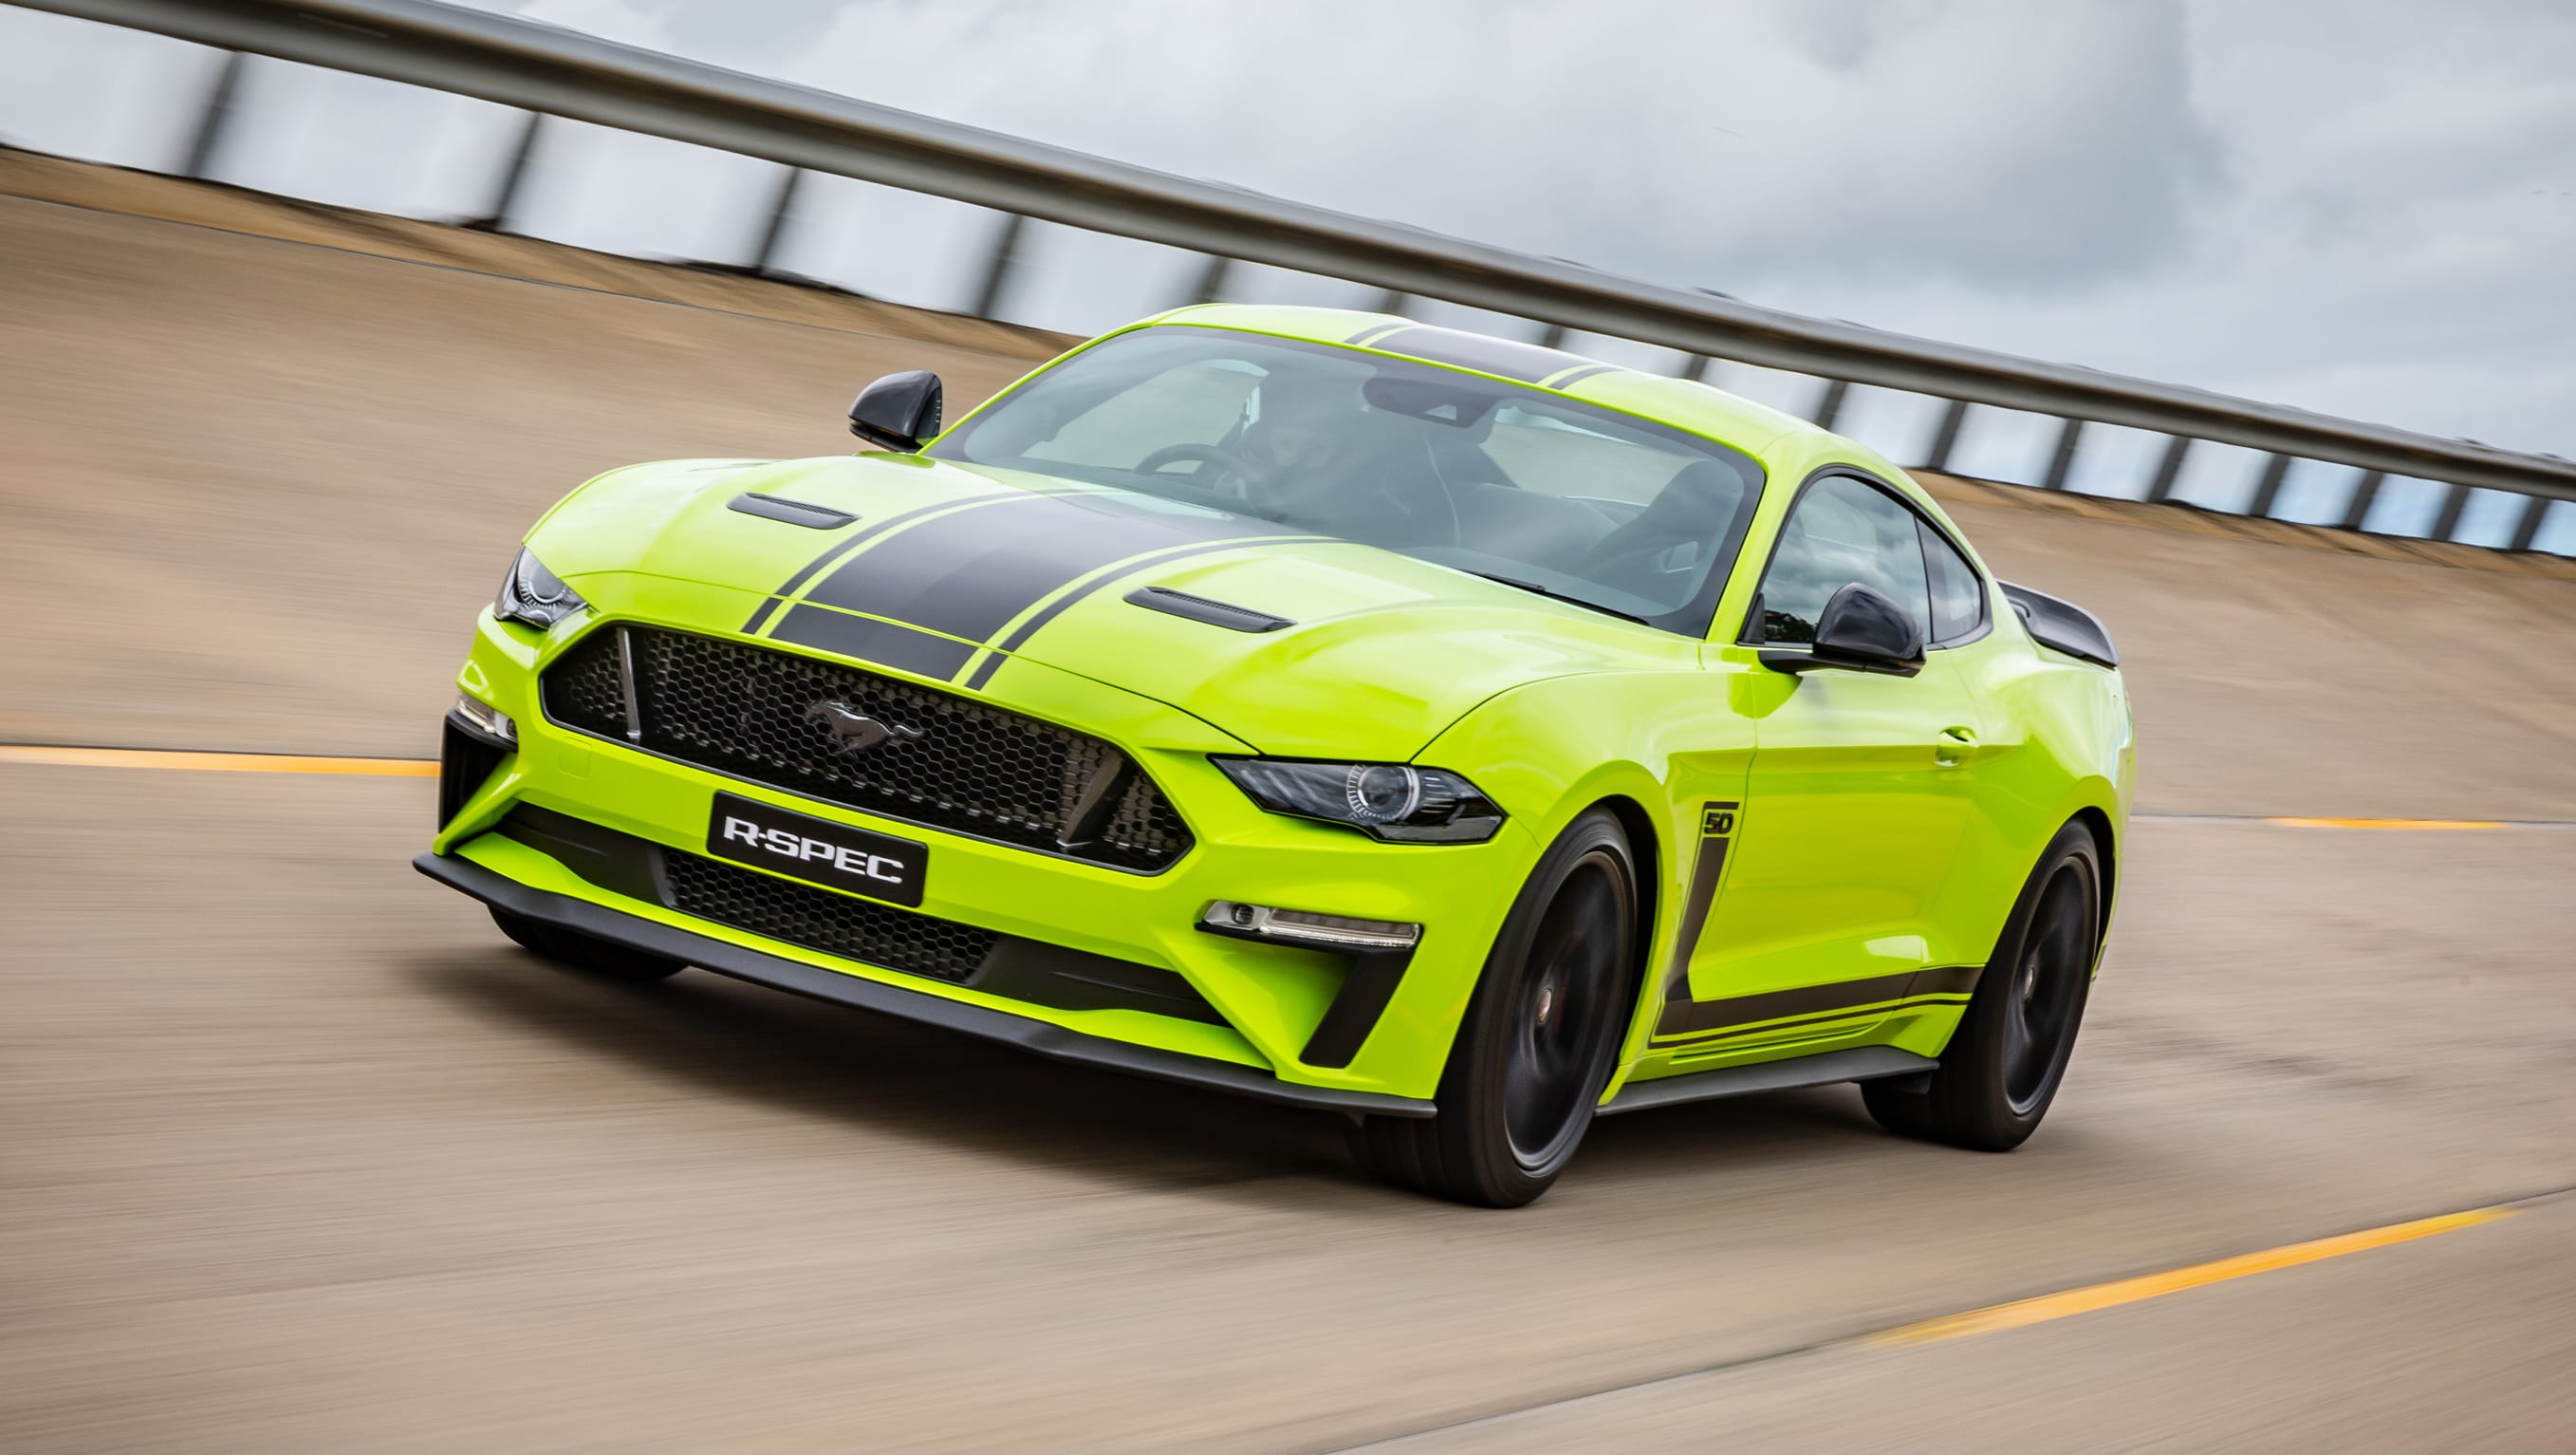 Meet the Ford Mustang R-Spec 2020, Australia's answer to the